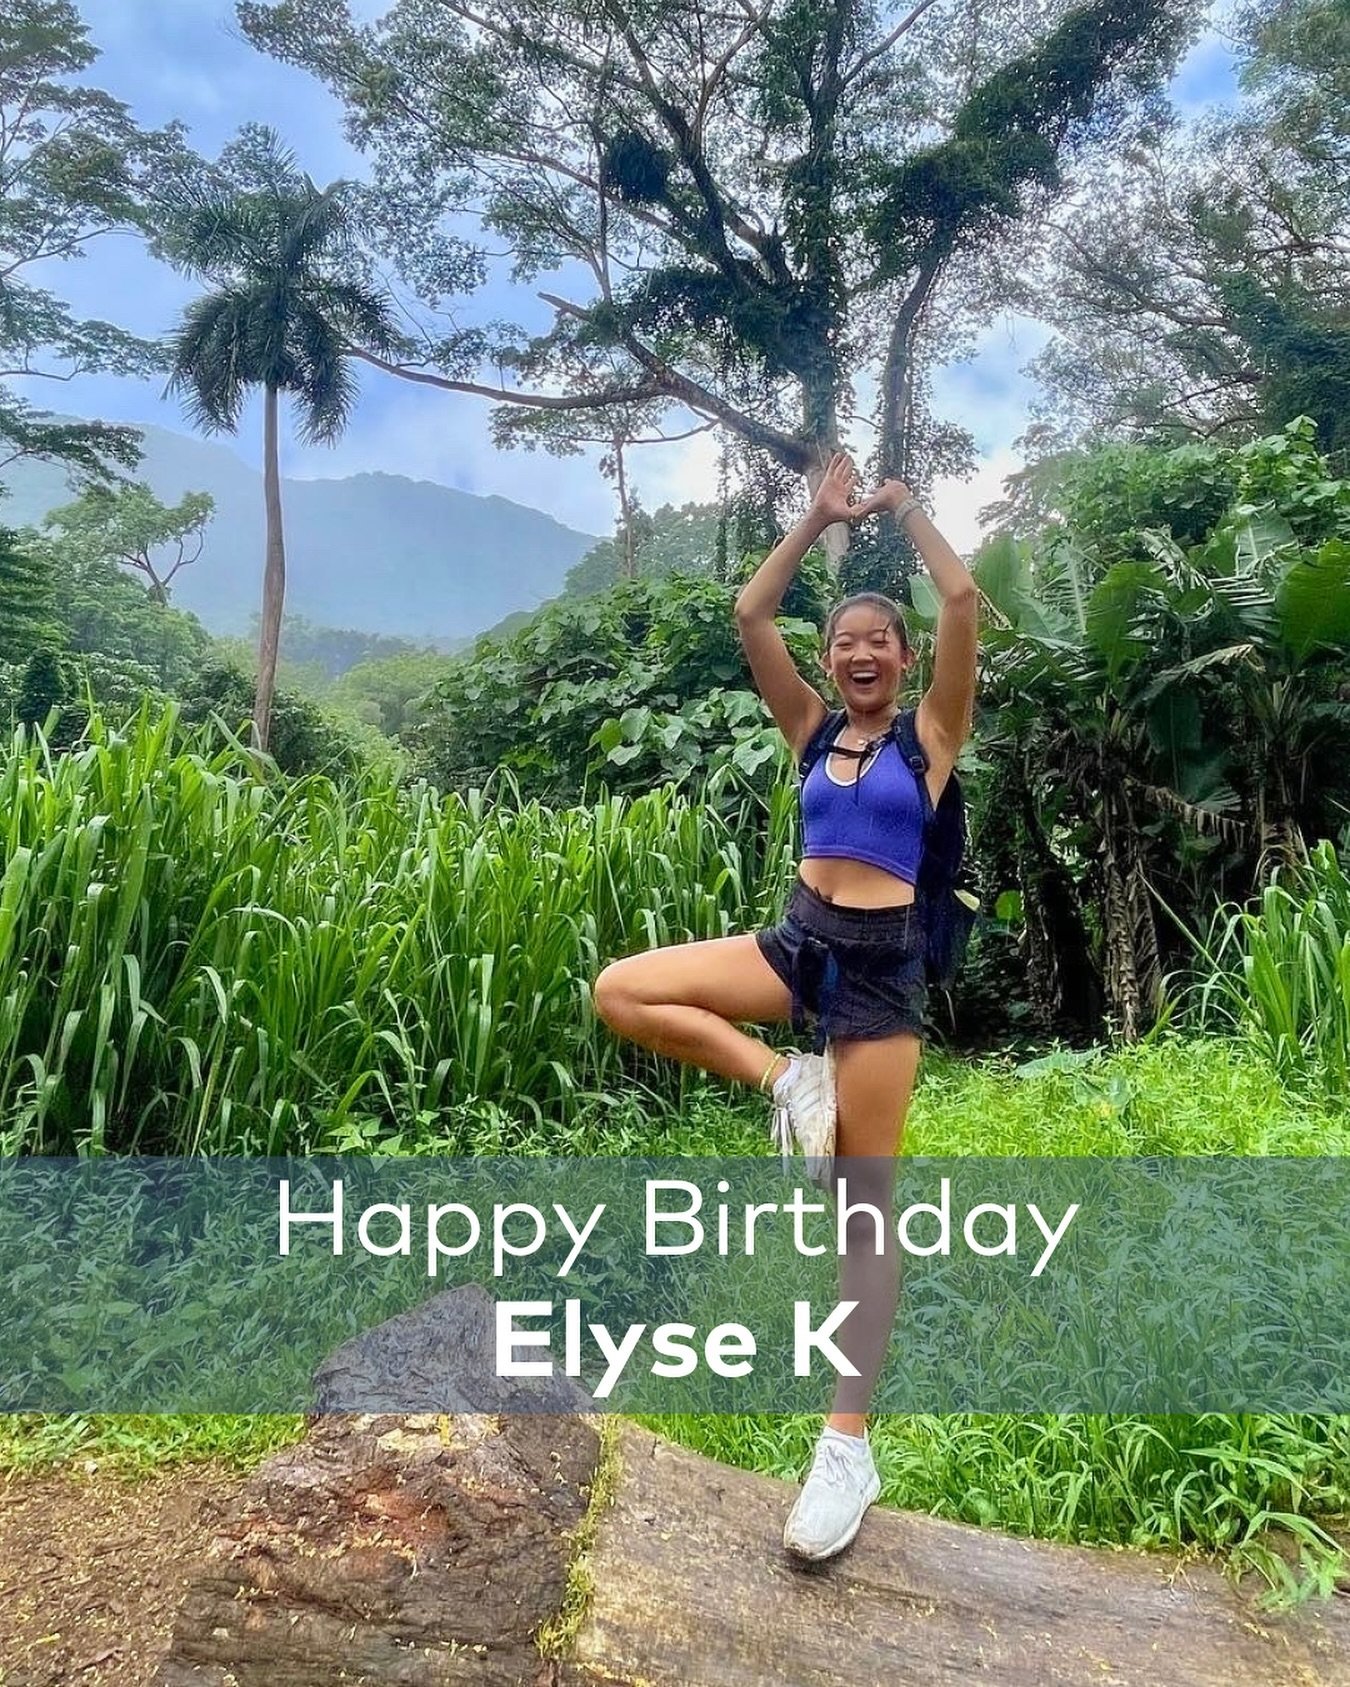 Happy birthday @elysekkim !!!

Elyse is fun, goofy, inquisitive and kind. She is an entrepreneur and a very hard worker who loves learning about the body and all of the cool things it can do.

Three fun facts about Elyse:
1. She is a psych/business m